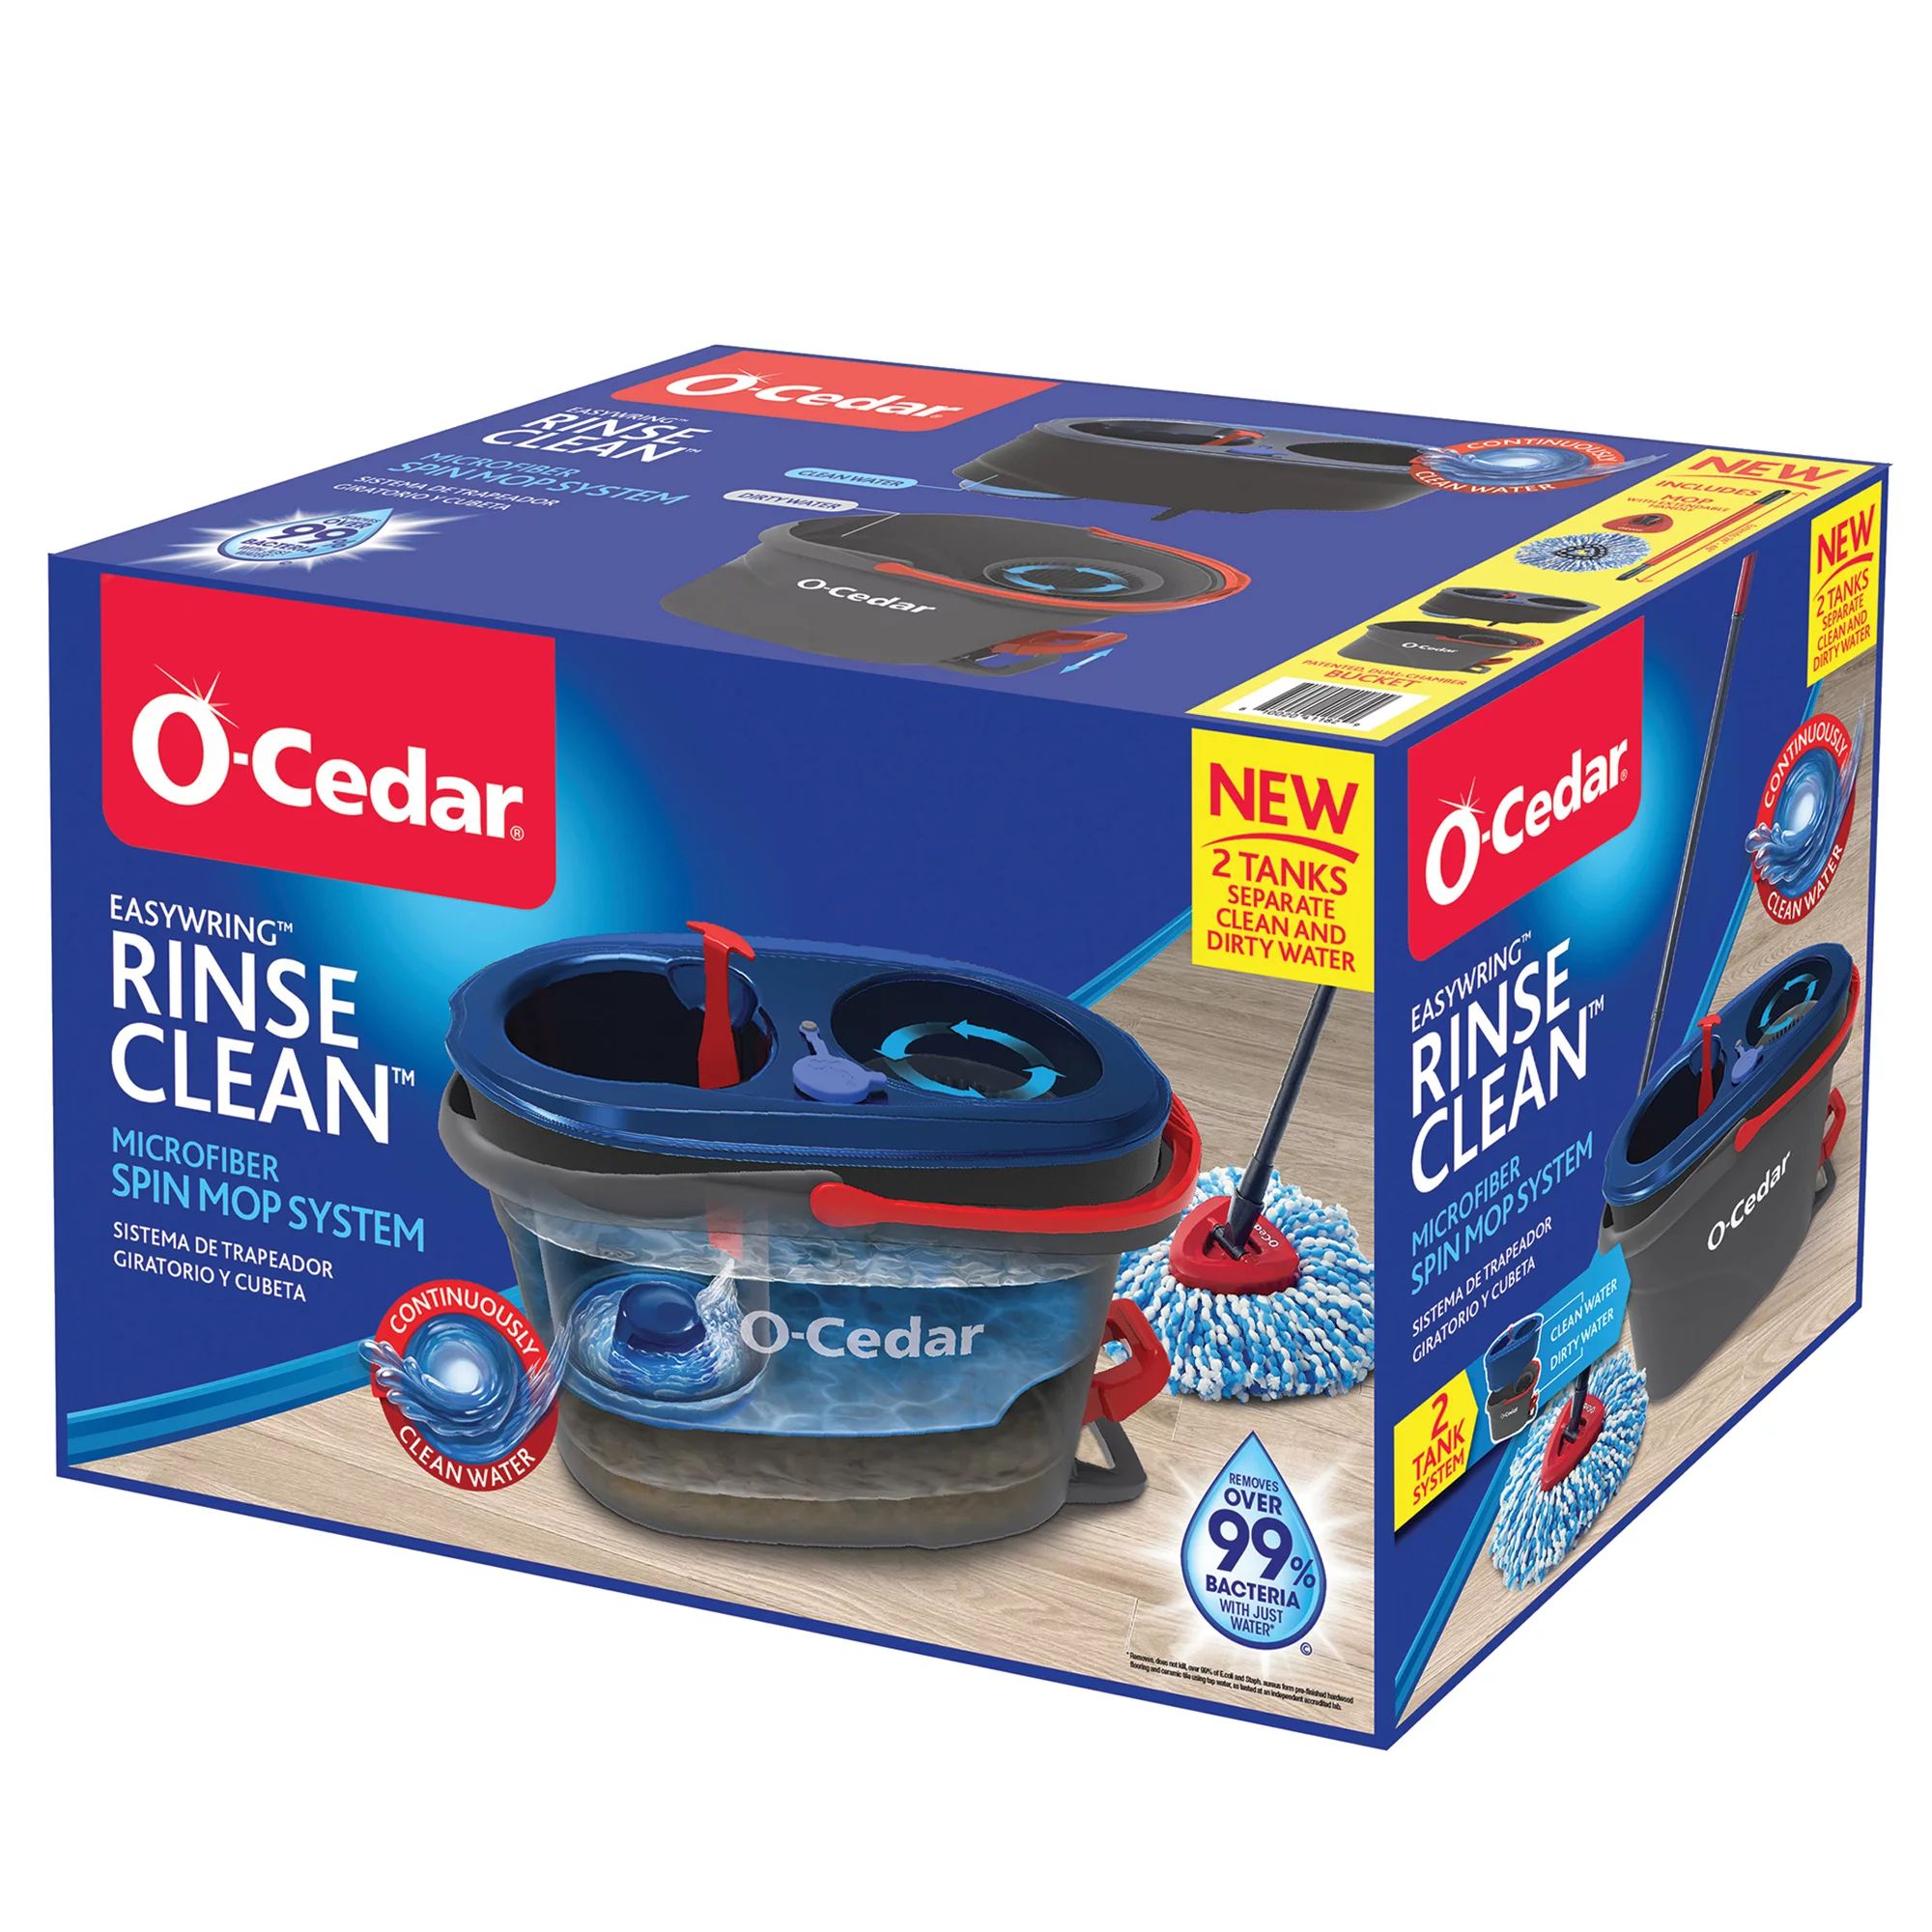 O-Cedar EasyWring RinseClean Spin Mop and Bucket System, Hands-Free System | Walmart (US)